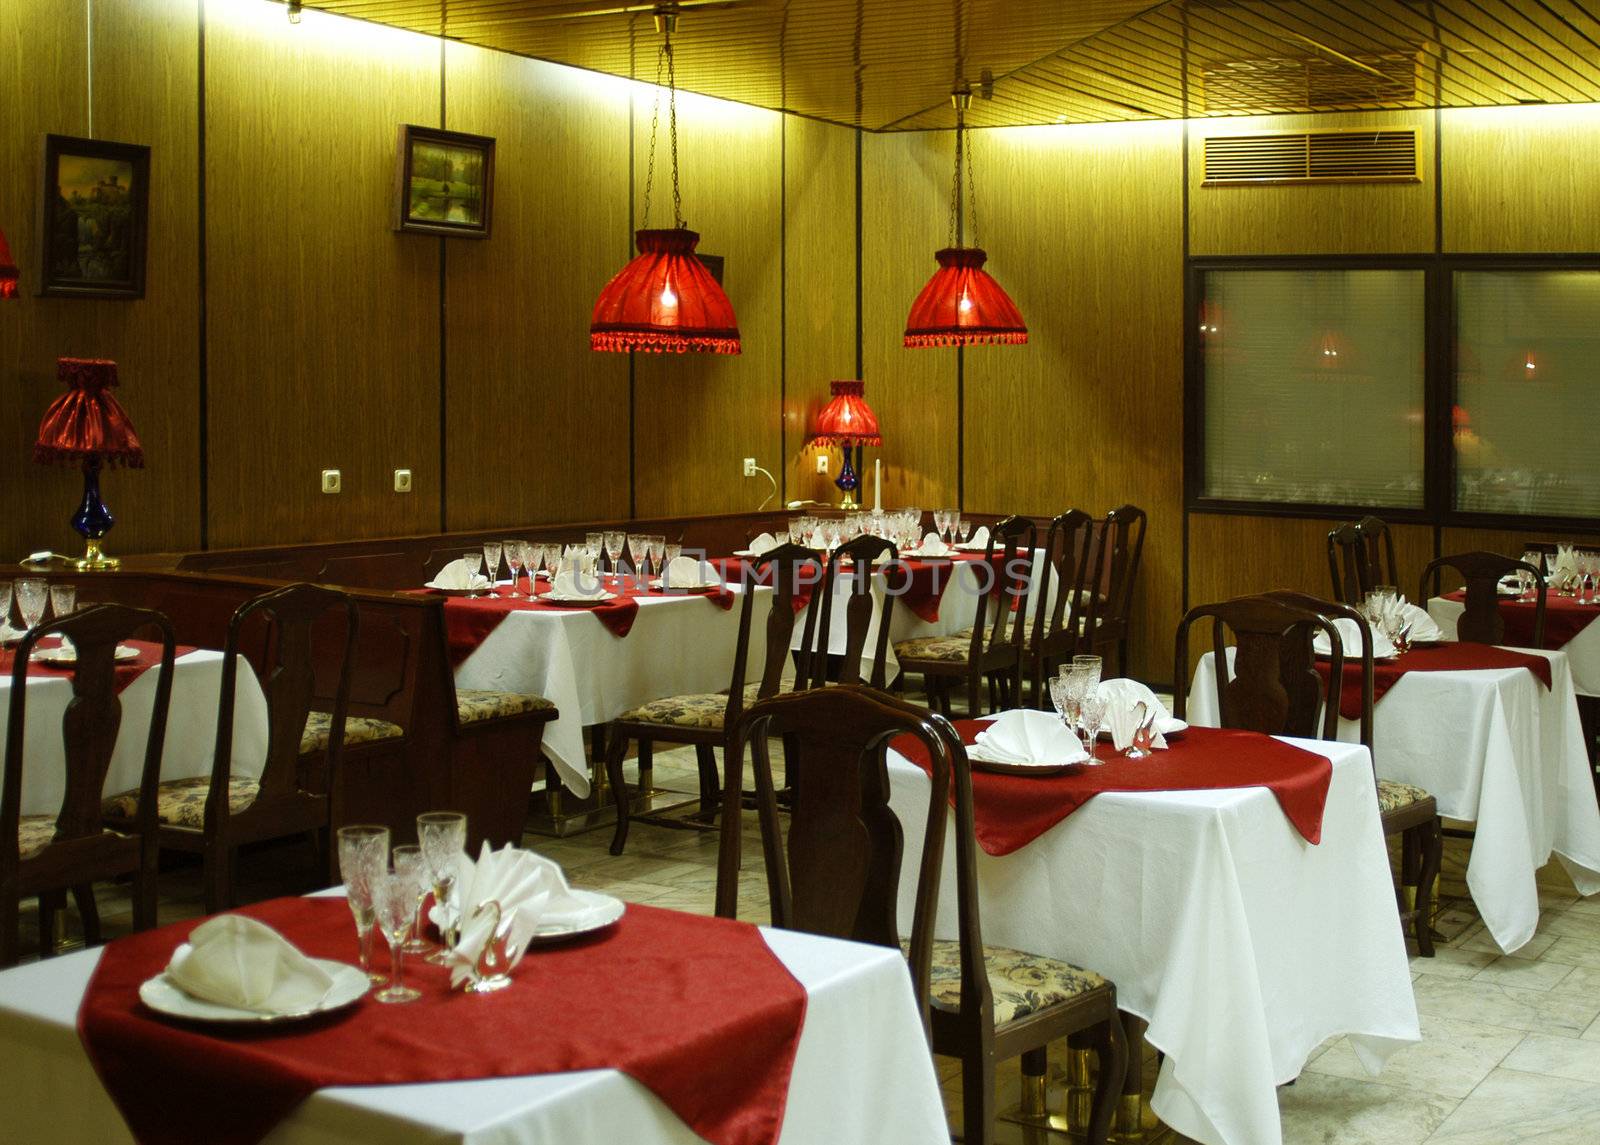 The cozy interior of the restaurant with red lights